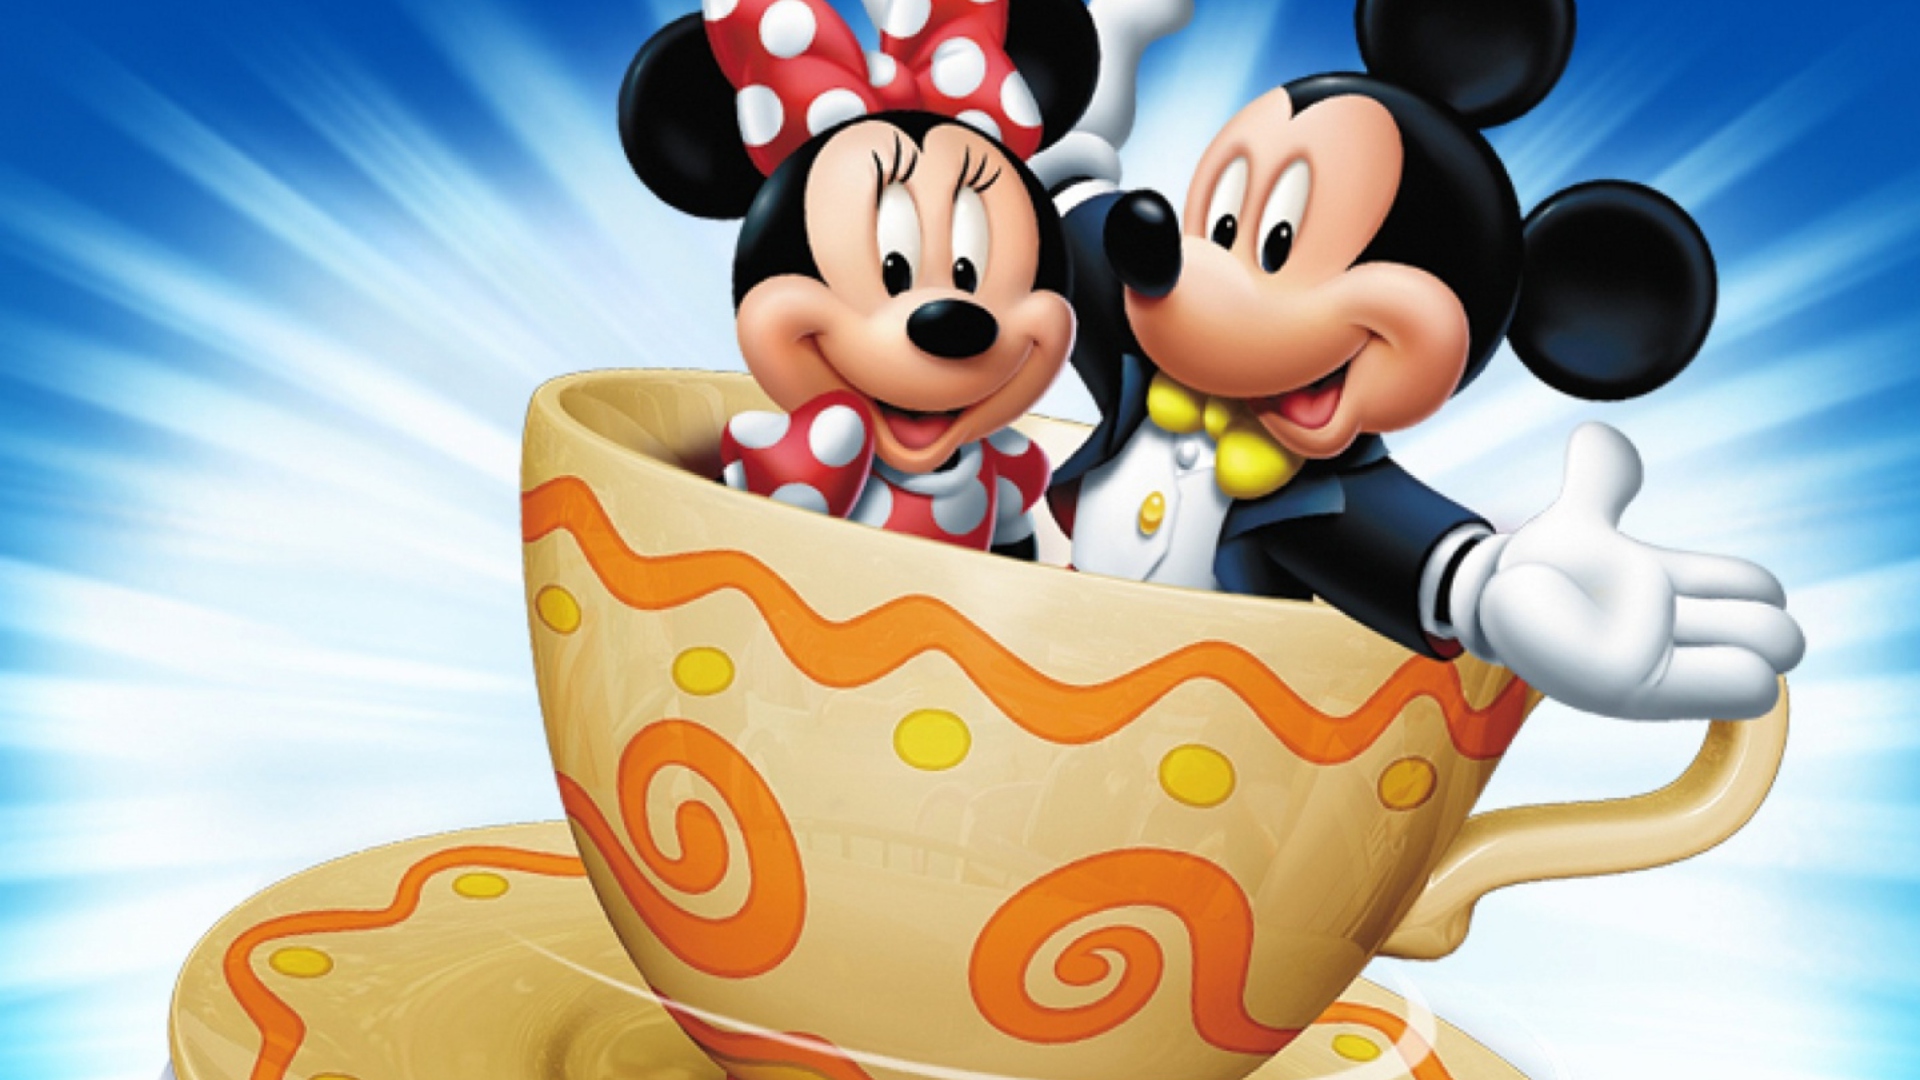 Mickey And Minnie Mouse In Cup screenshot #1 1920x1080